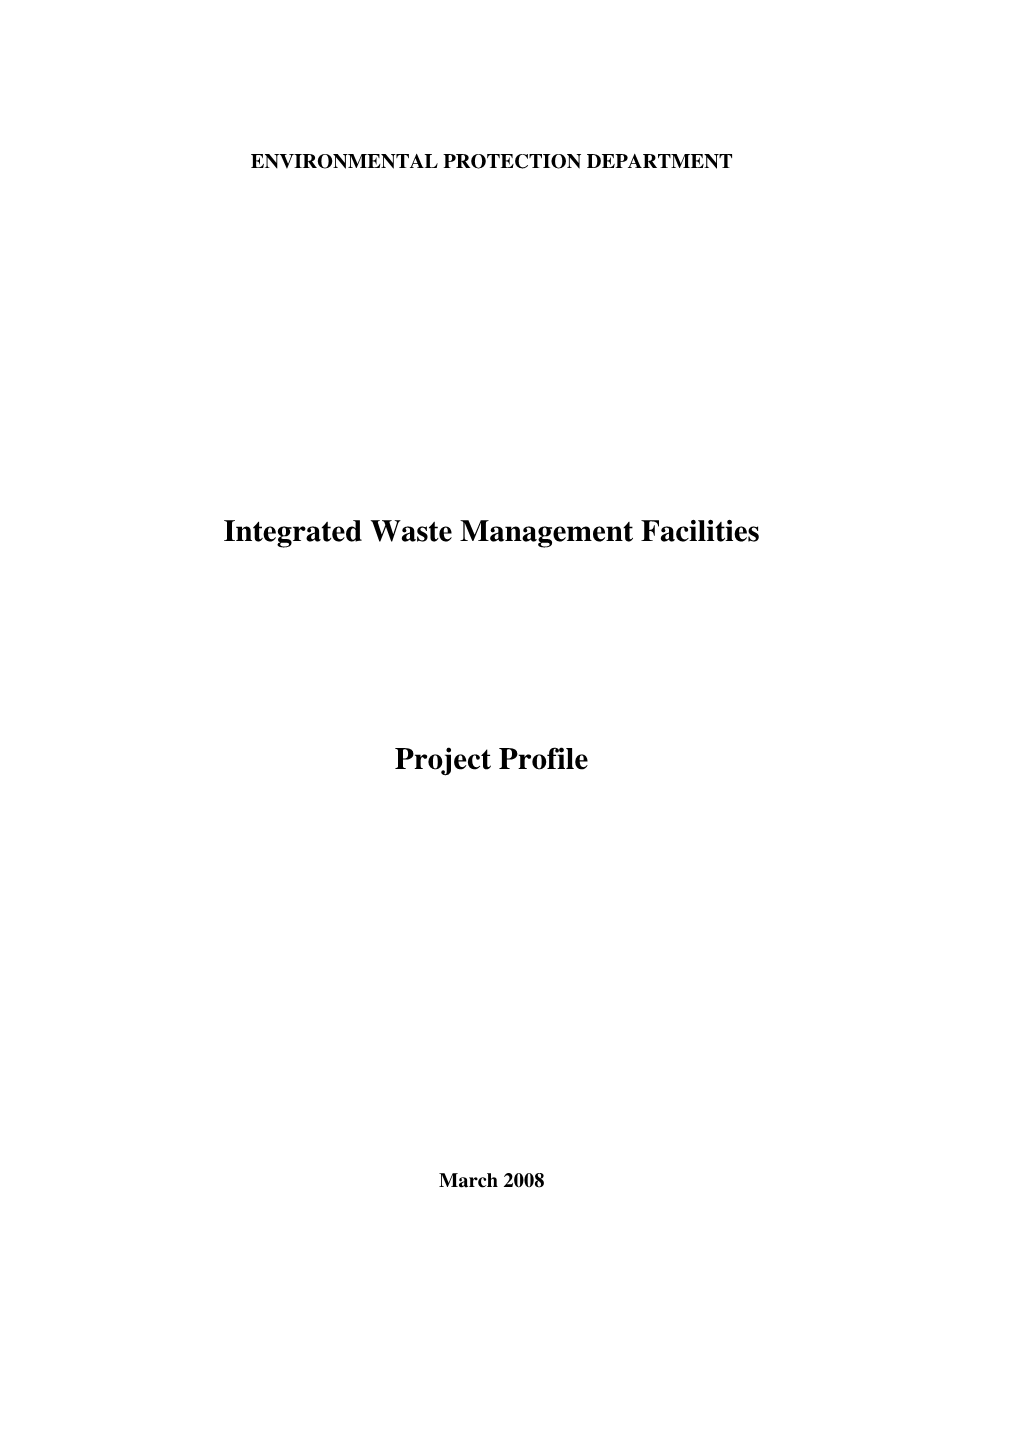 Integrated Waste Management Facilities Project Profile